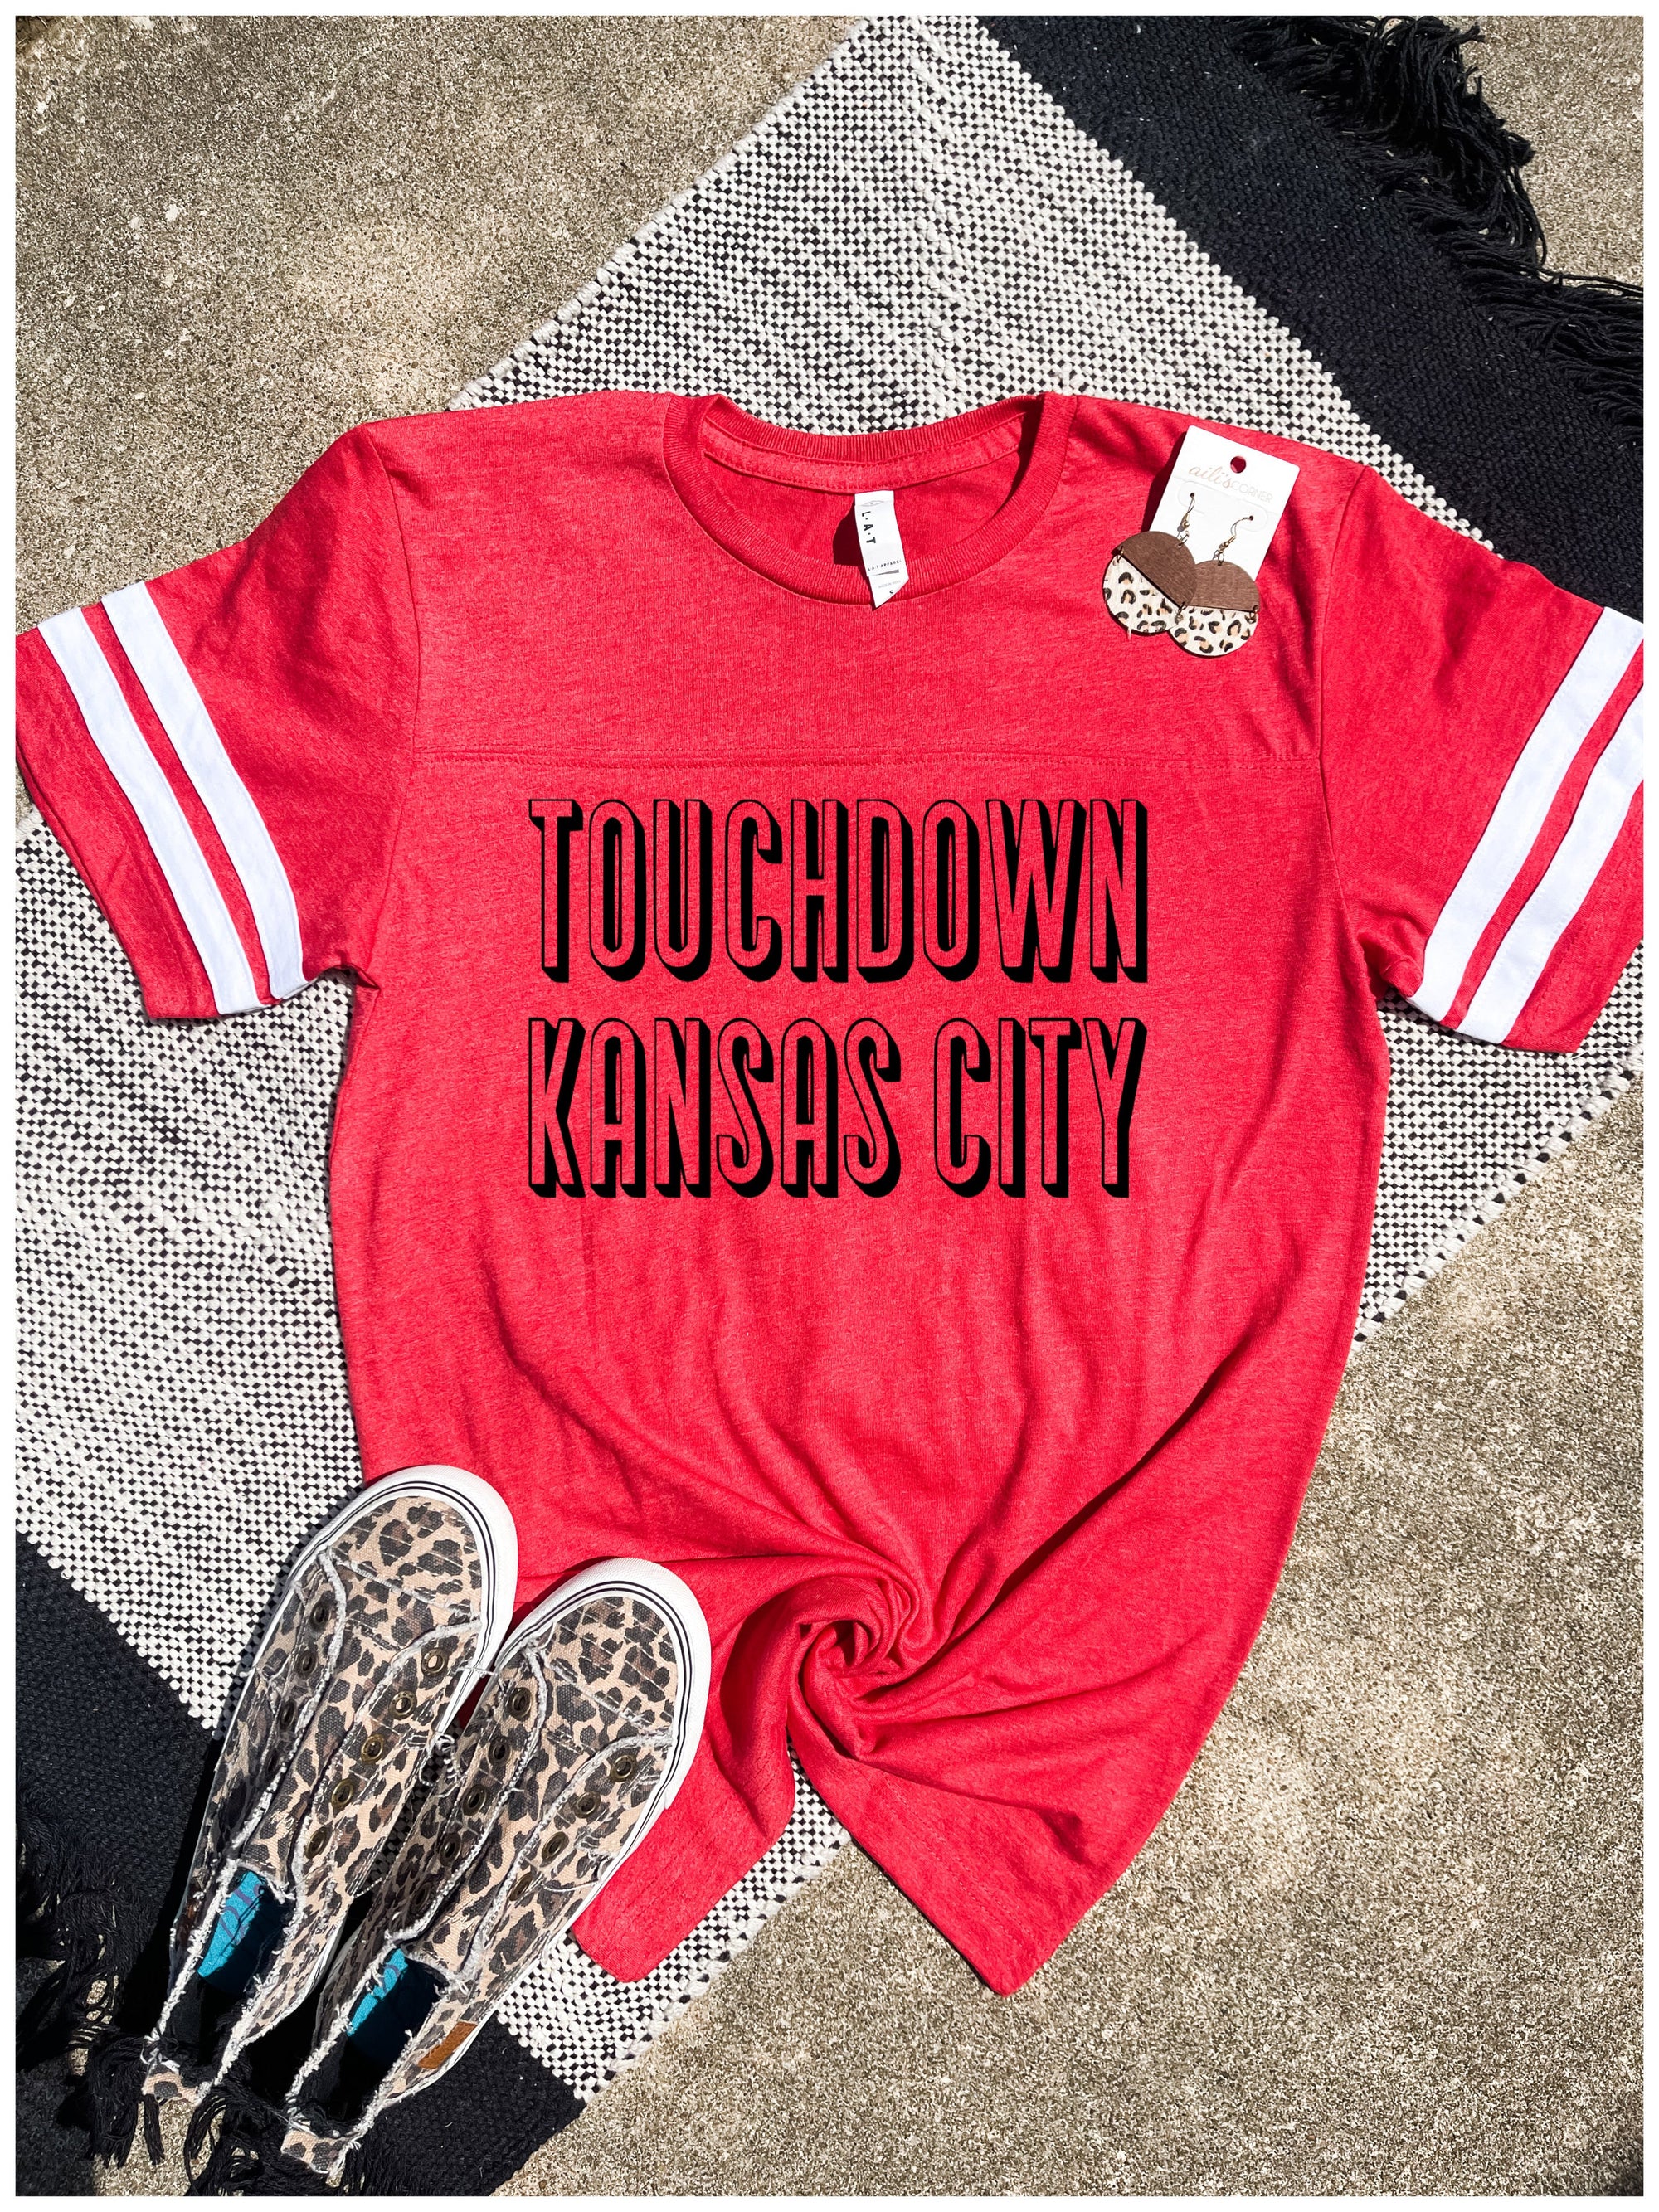 **HALFTIME DEAL** Retro Touchdown Kansas City Red Striped Sleeve Tee